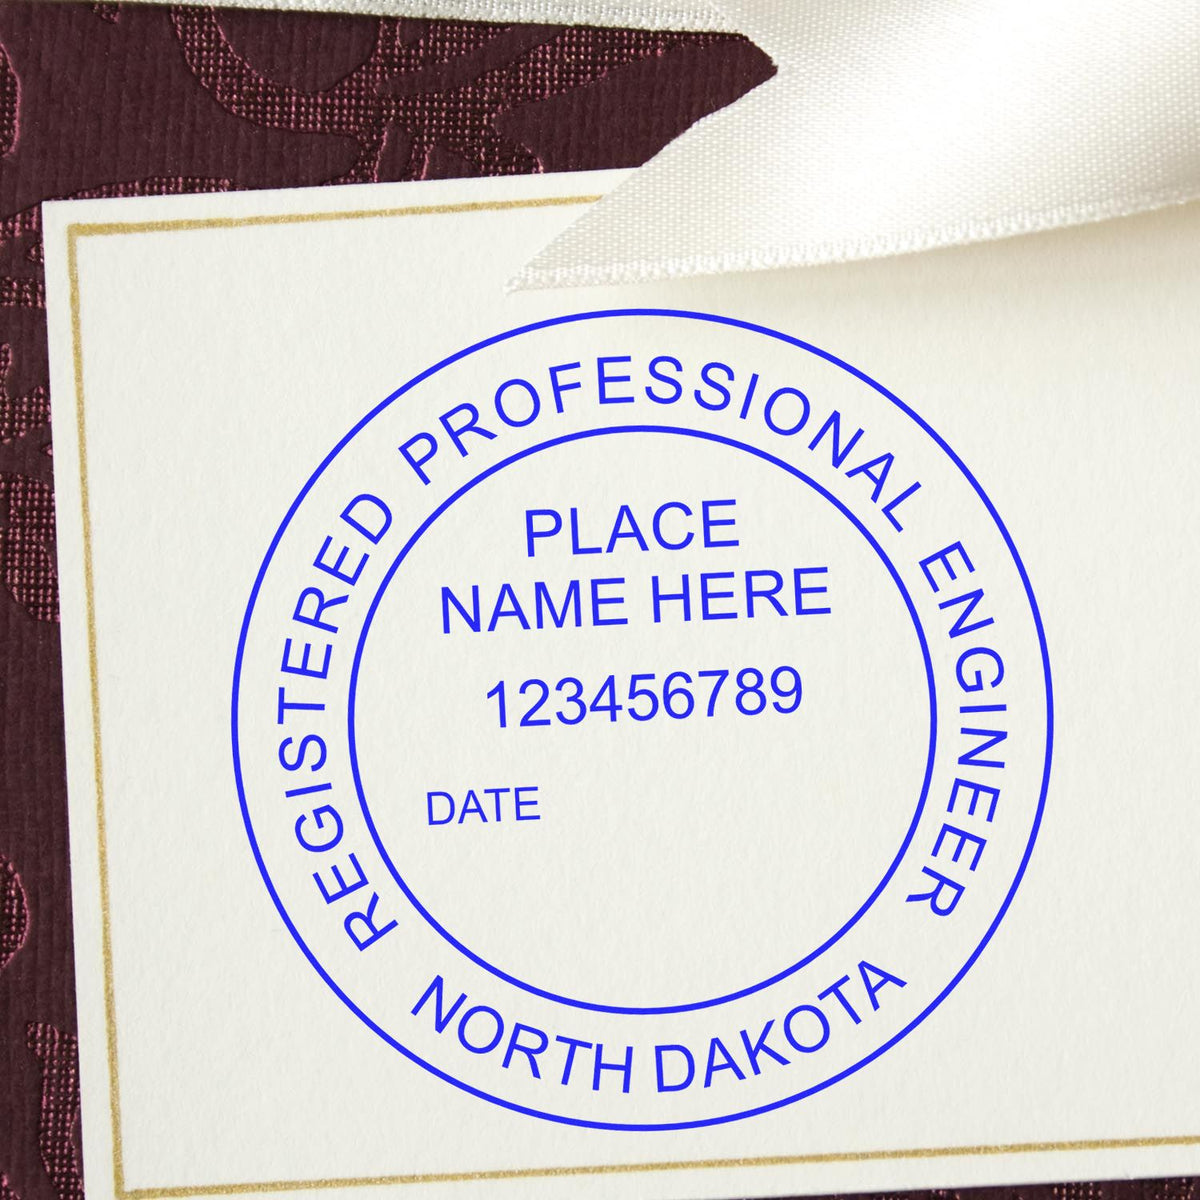 The Slim Pre-Inked North Dakota Professional Engineer Seal Stamp stamp impression comes to life with a crisp, detailed photo on paper - showcasing true professional quality.